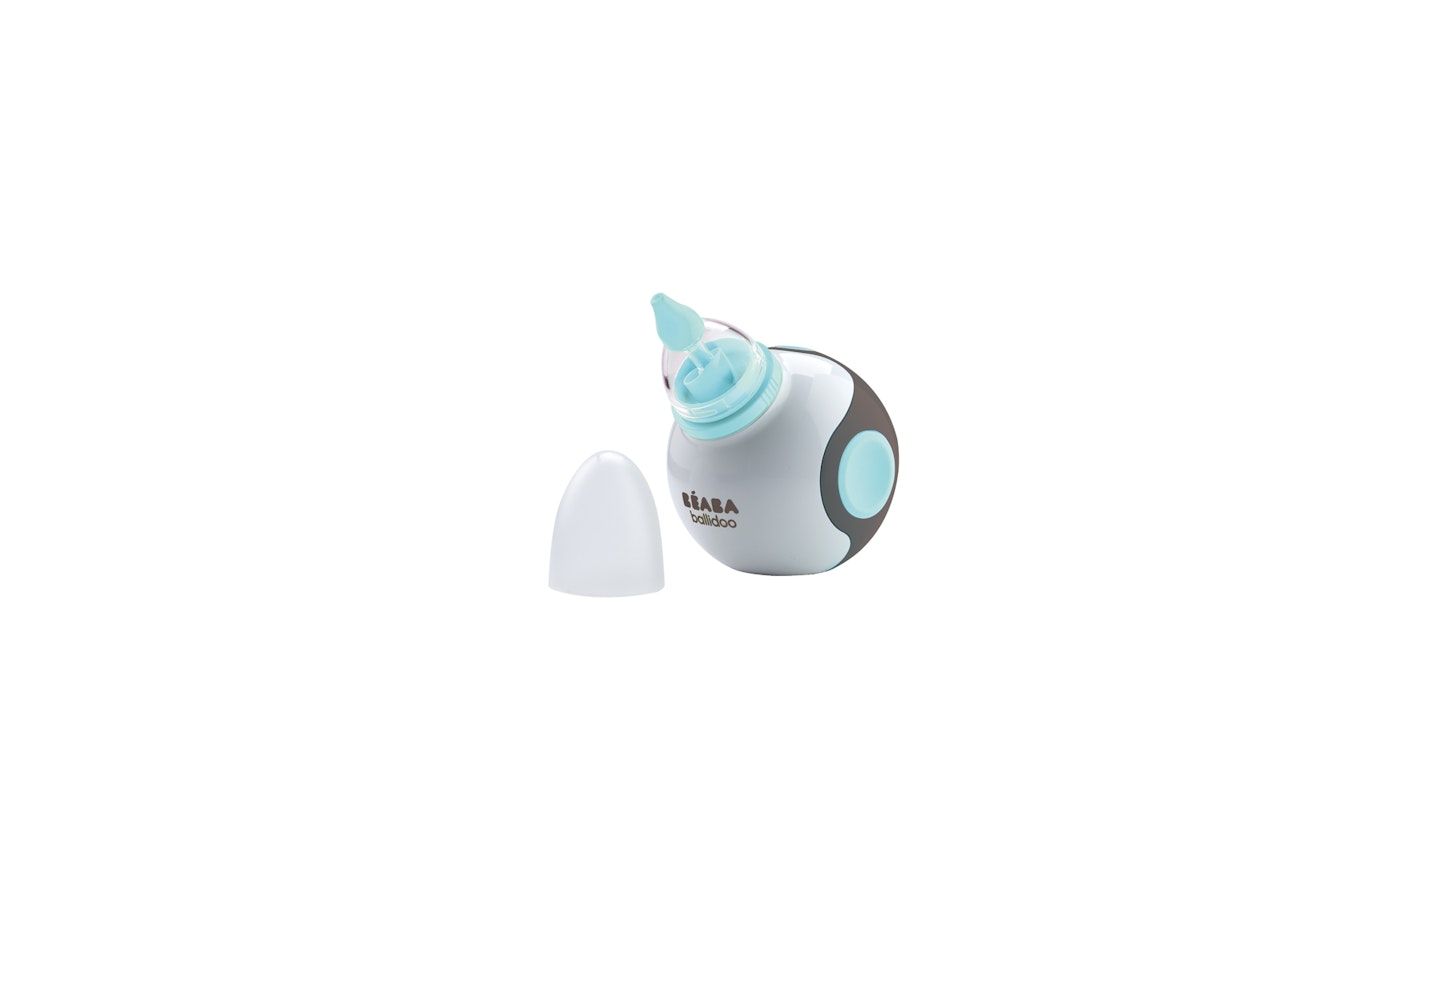 It’s not always fun cleaning your baby’s nose but you can do it easily with this electric aspirator. It has a low noise level so it won’t scare your baby and the small ergonomic shape makes it easy to hold. You can also adjust the aspiration strength acc